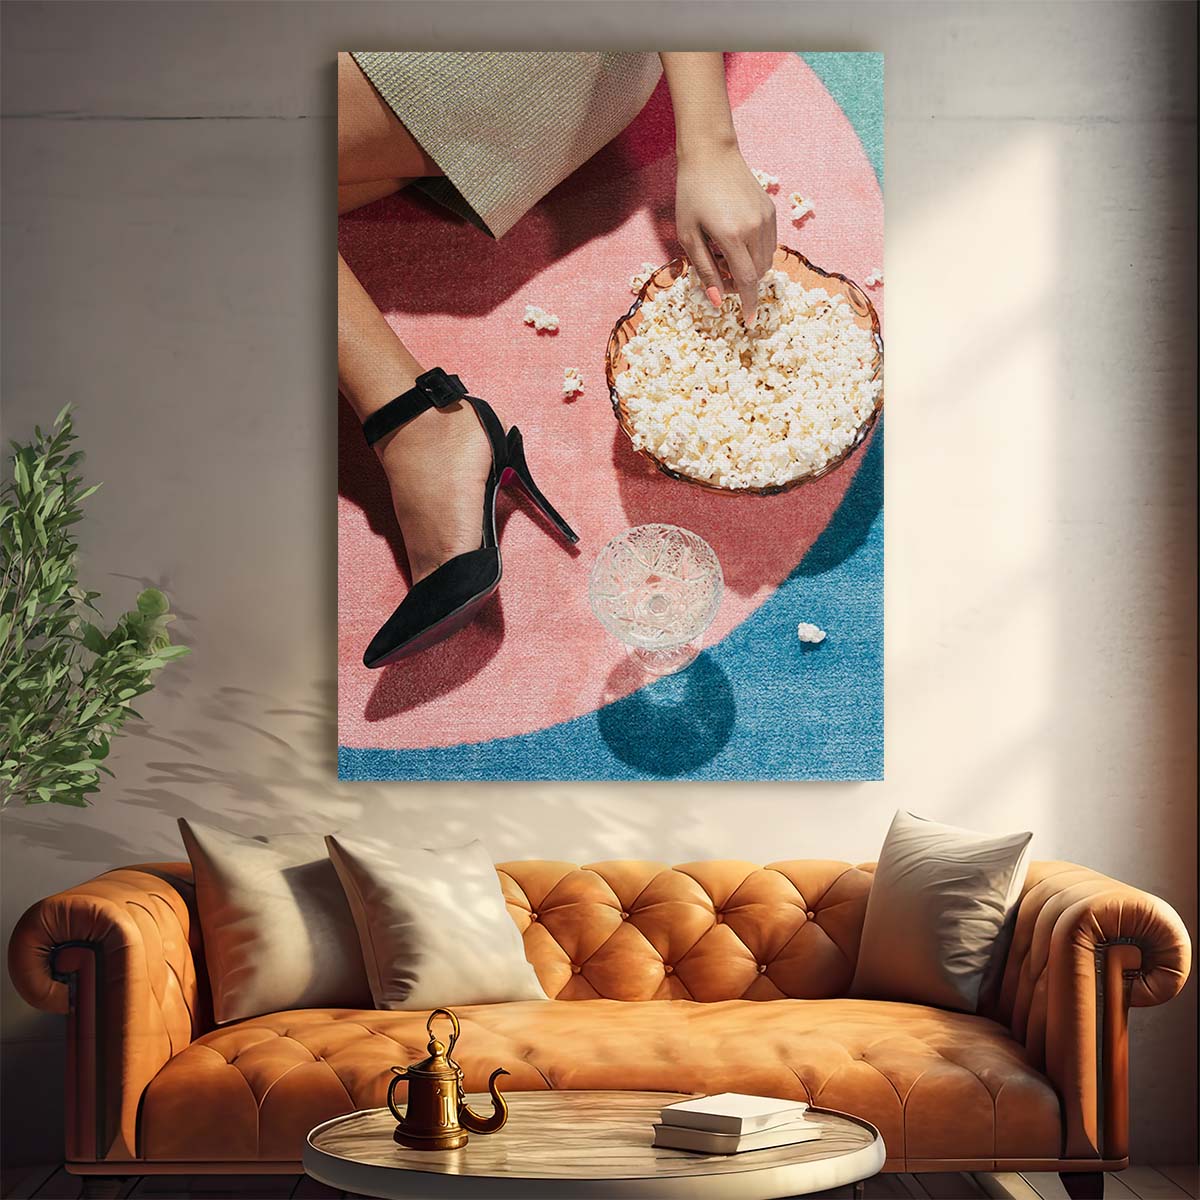 Vintage Pastel High Heels & Popcorn Fashion Photography Portrait by Luxuriance Designs, made in USA